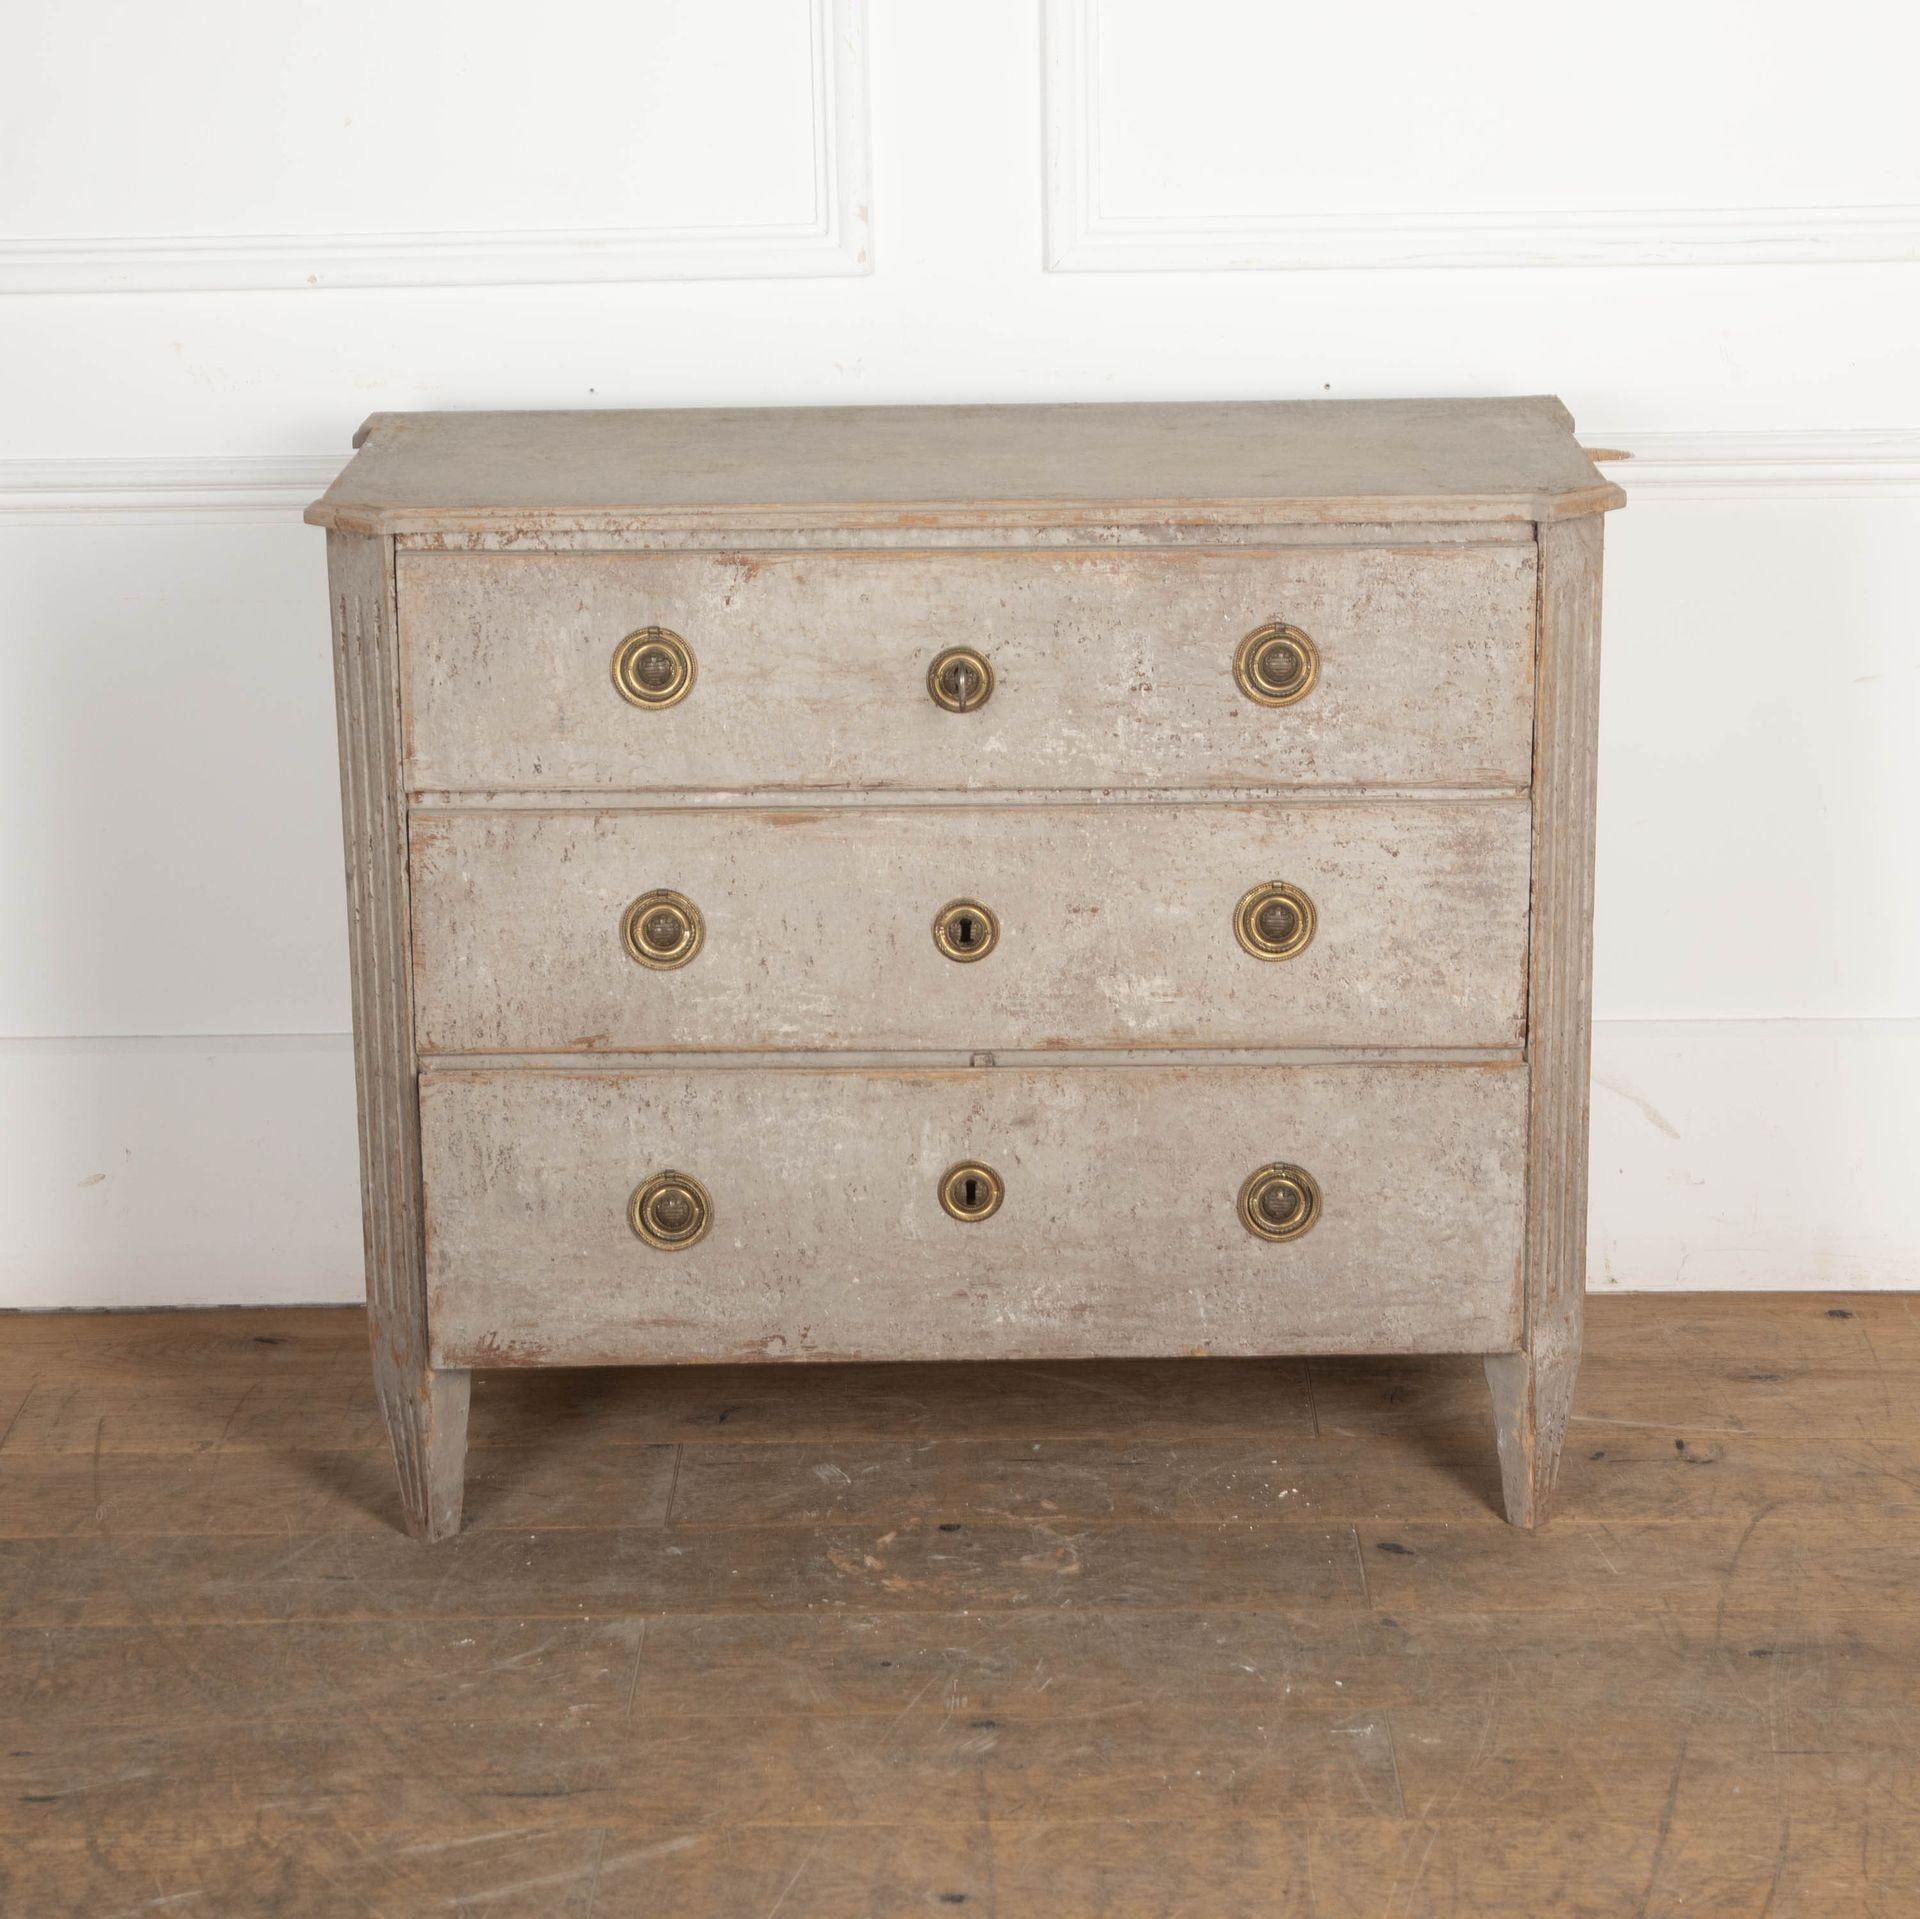 18th century period Gustavian Commode c.1800.
Later painted.
With original locks.